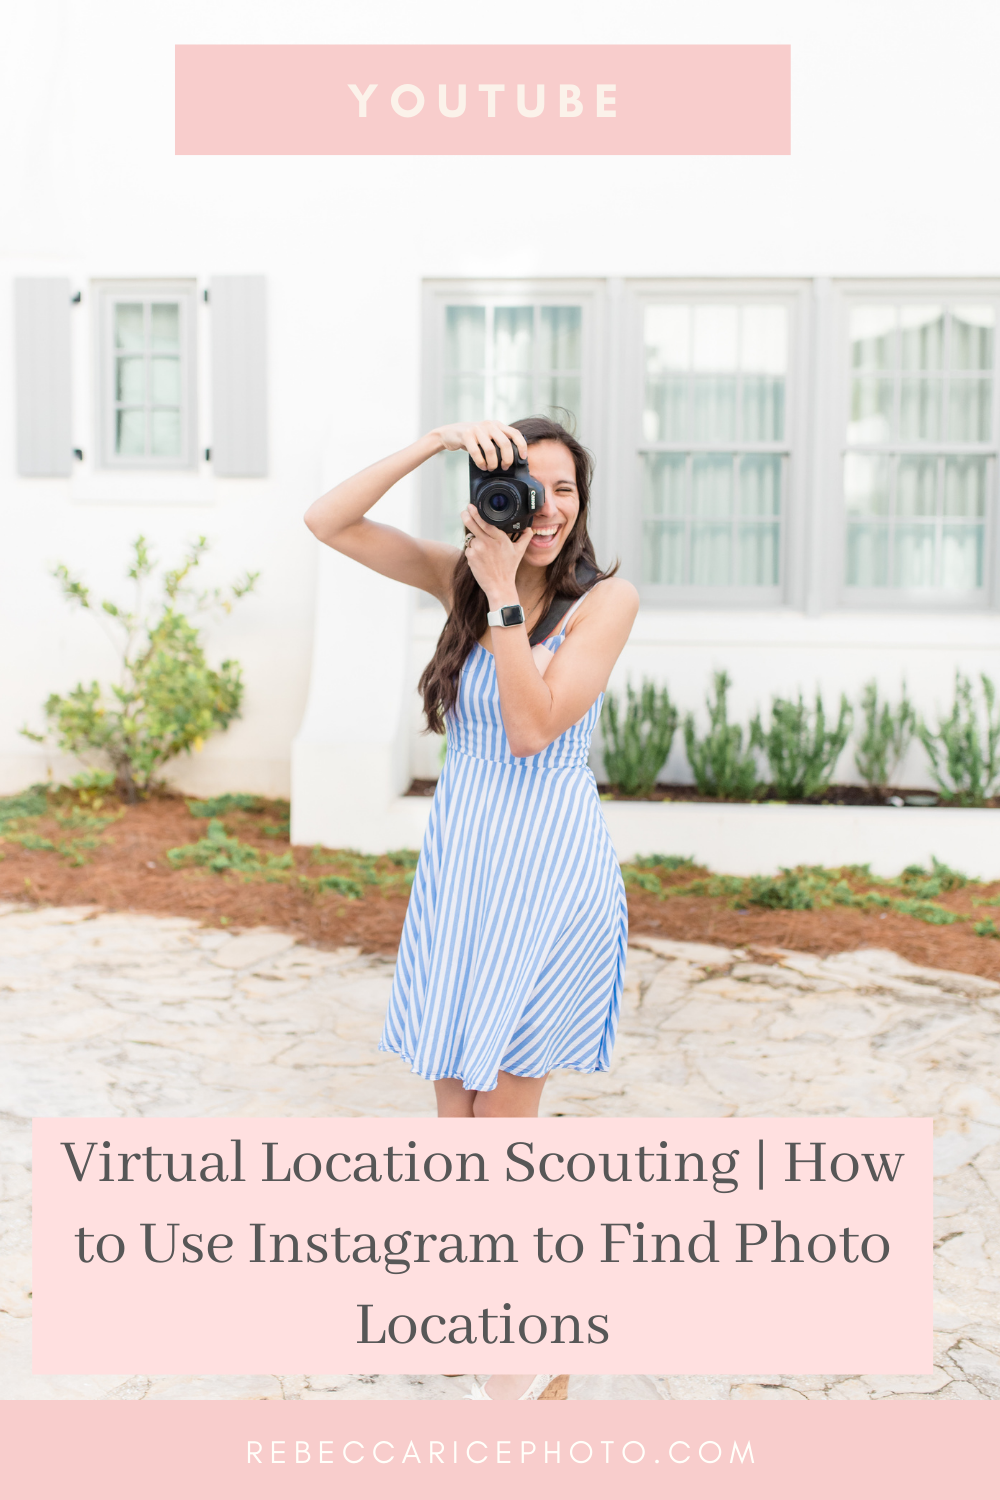 Virtual Location Scouting | How to Use Instagram to Find Photo Locations